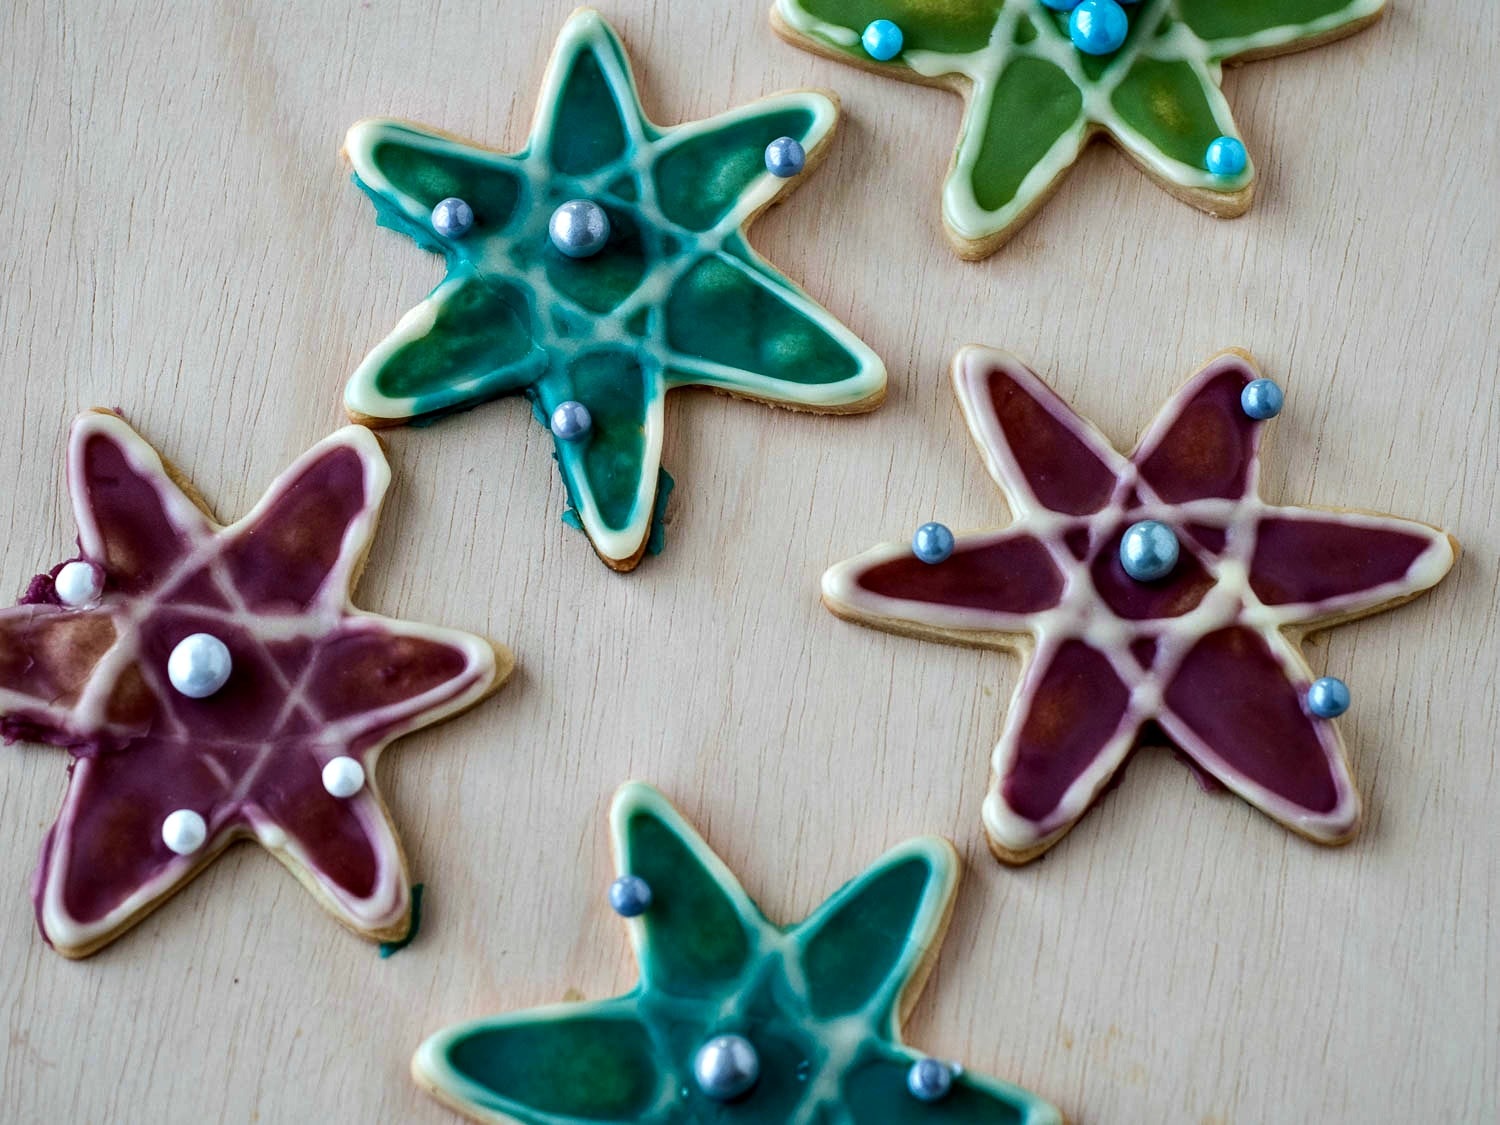 These Chemistry Cookies are adorable! Perfect for a science birthday party or just sharing your love of science with friends.